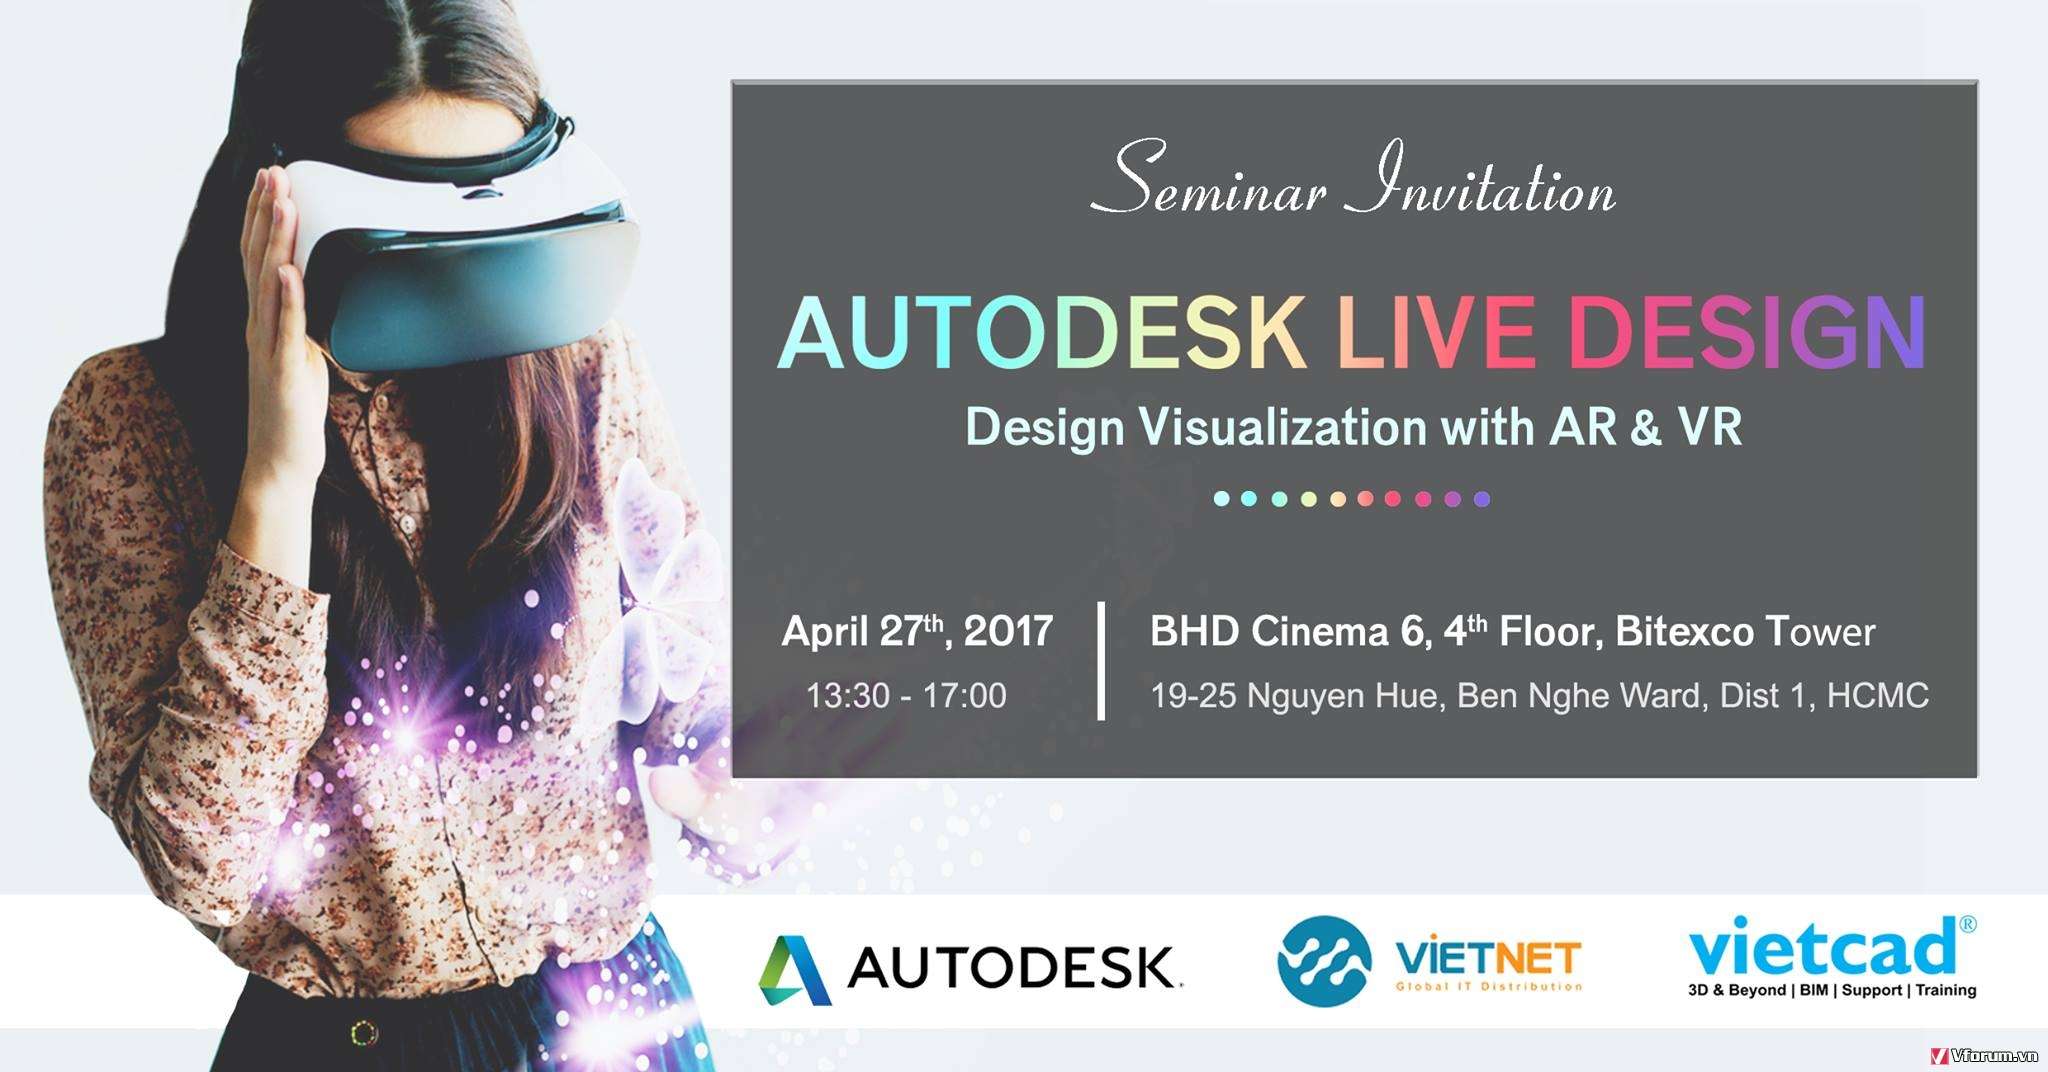 [Sự kiện] Autodesk LIVE Design - Design Visualization with AR and VR